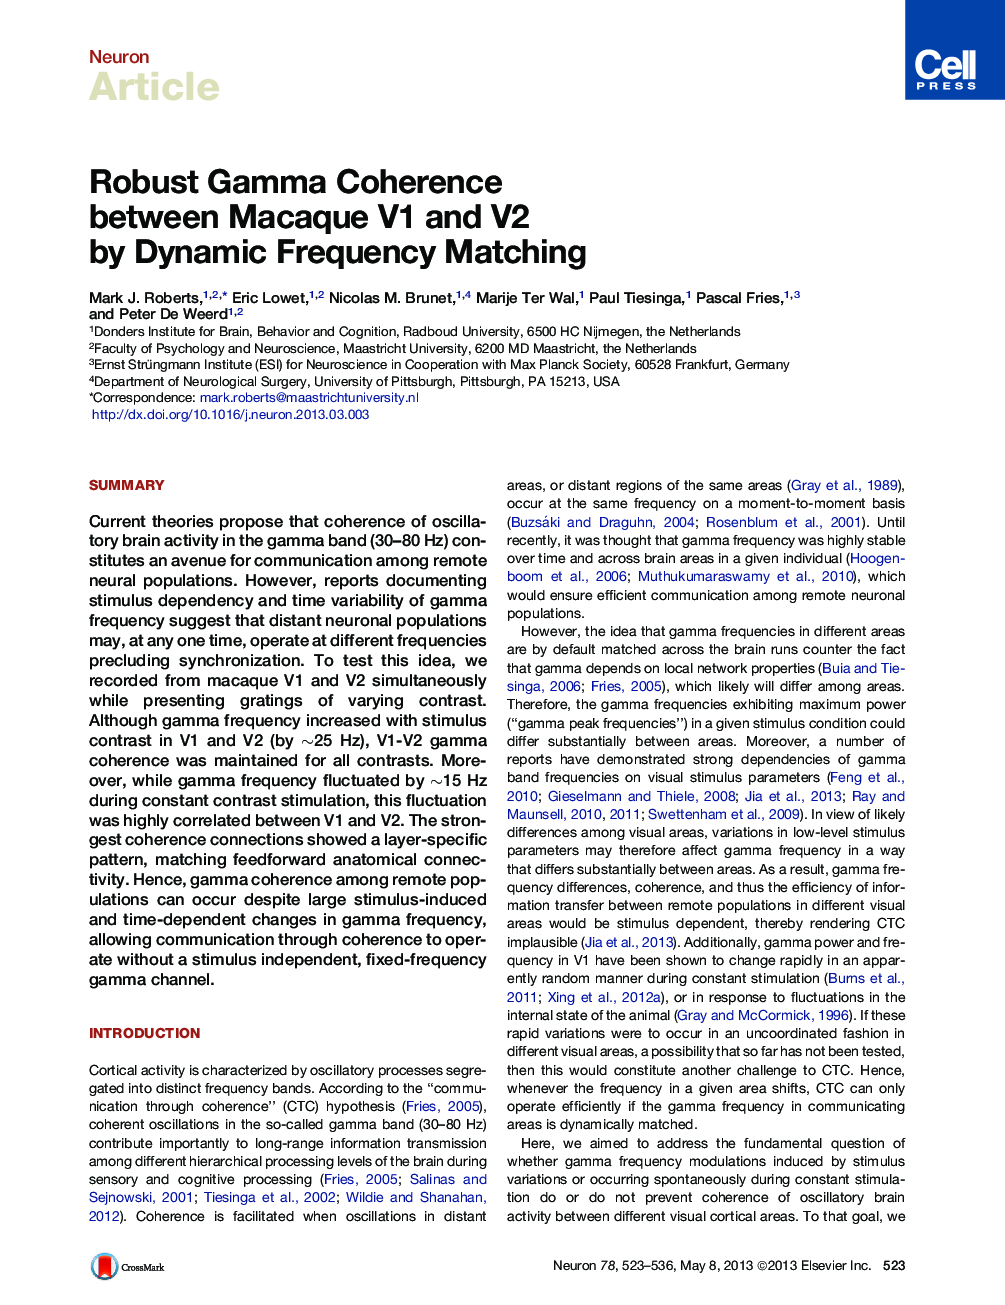 Robust Gamma Coherence between Macaque V1 and V2 by Dynamic Frequency Matching